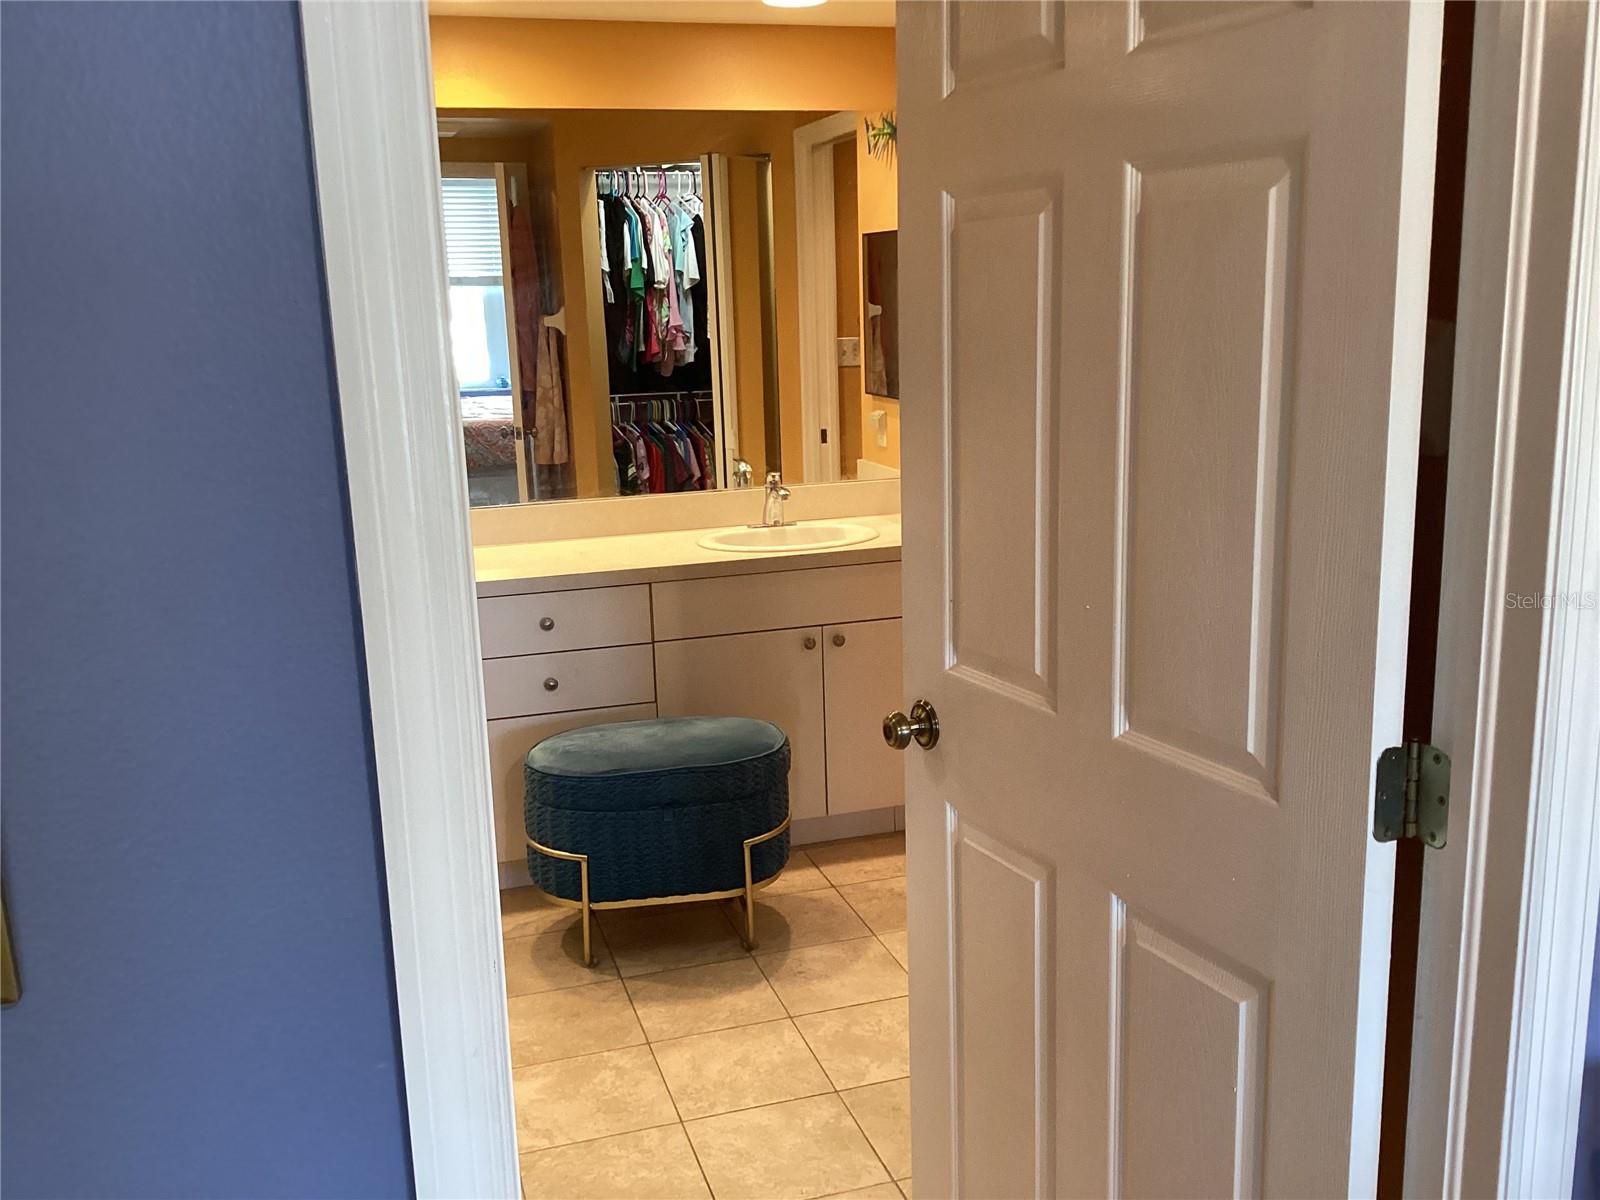 Ensuite bathroom with two walking closets